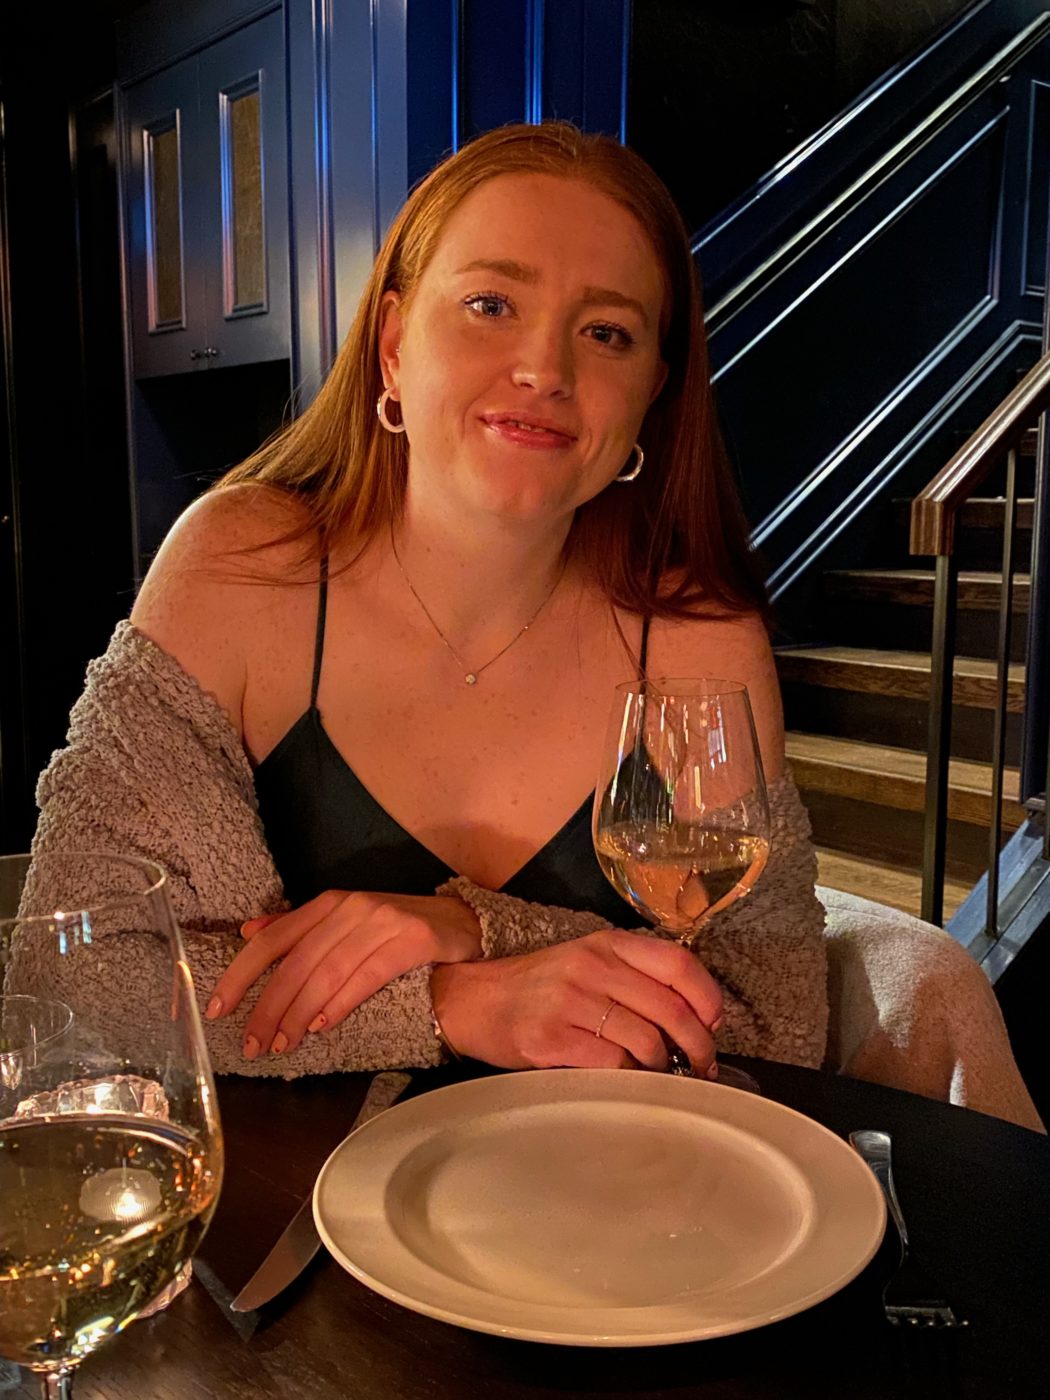 A young woman in a black dress and grey shawl sitting at a dining table holding a glass of white wine.